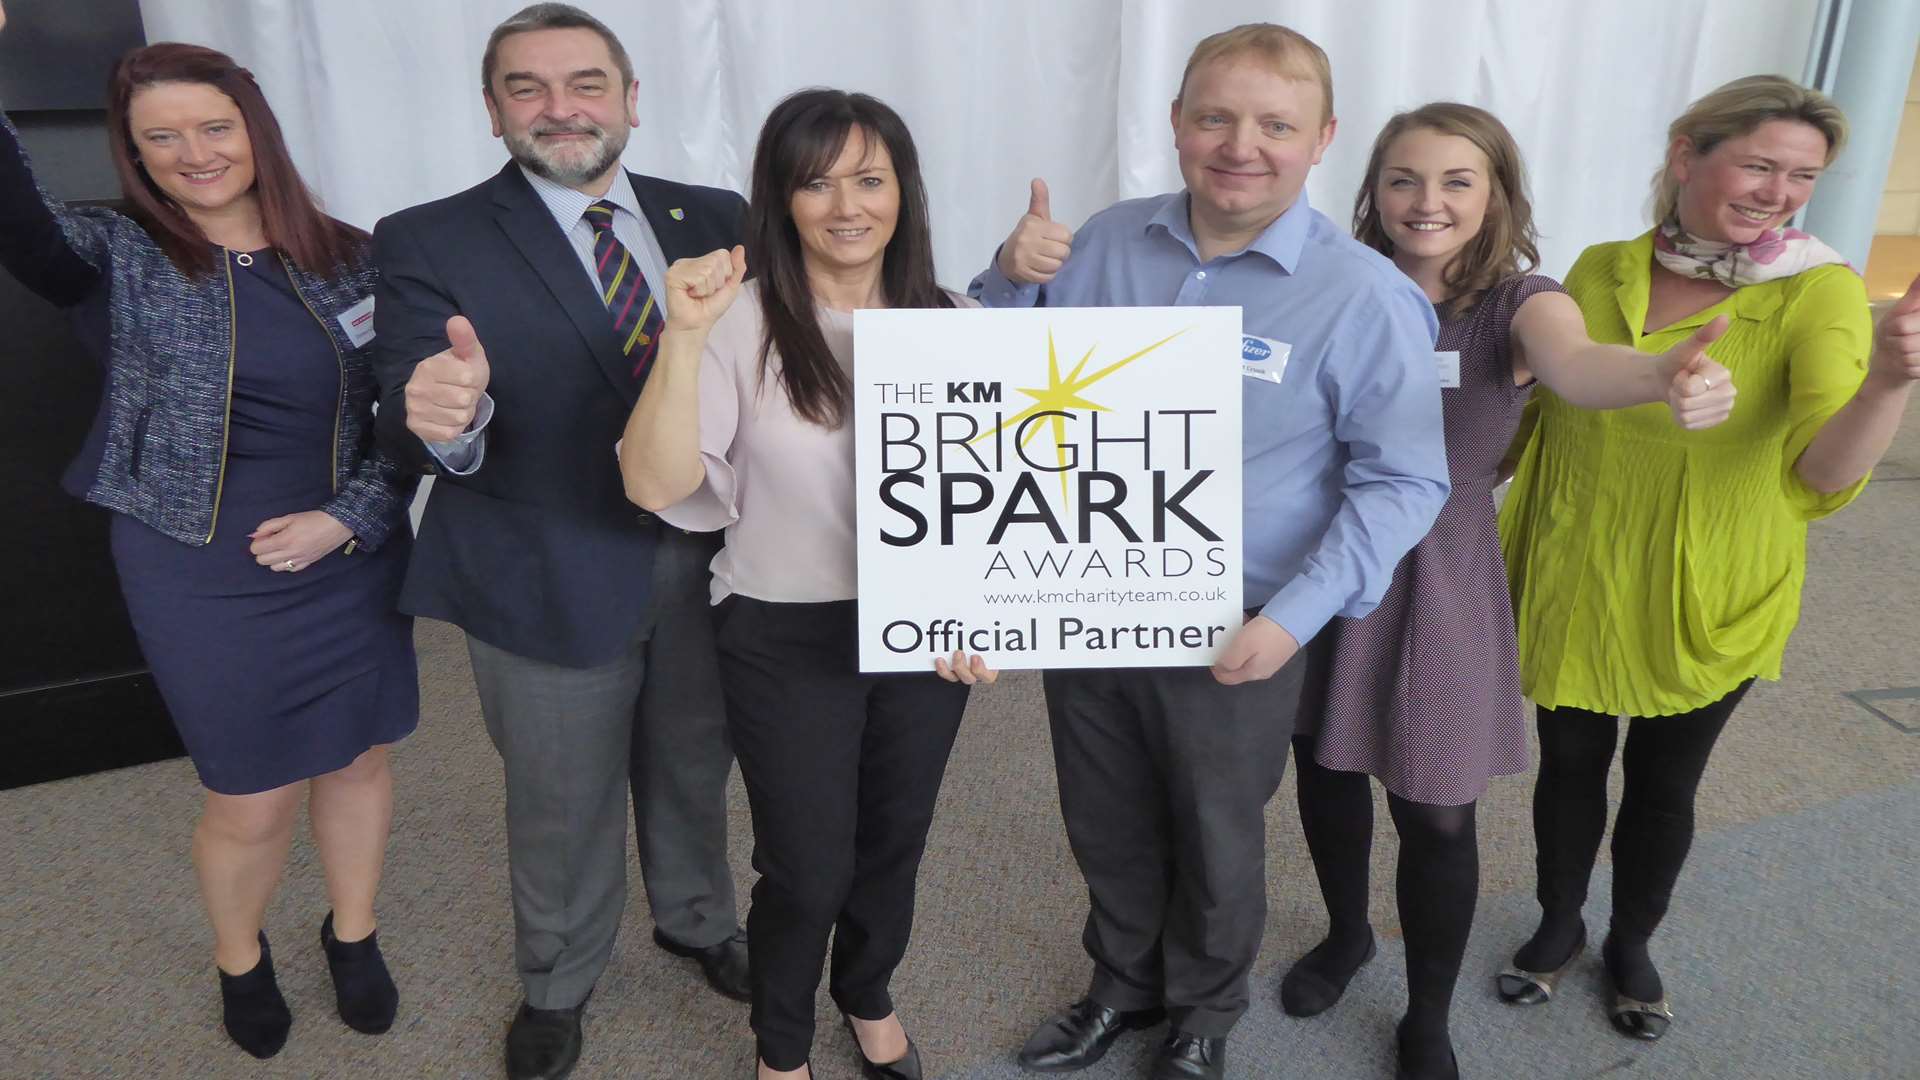 The formal launch of the KM Bright Spark Awards at Discovery Park. (l-r) Emma Gibbons of BAE, Steve Smith of Astro, Jane Barlow of Benenden Hospital Trust, Robert Crook of Pfizer, Becky Lipscombe of ITL, and Kimberley Anderson of Discovery Park.